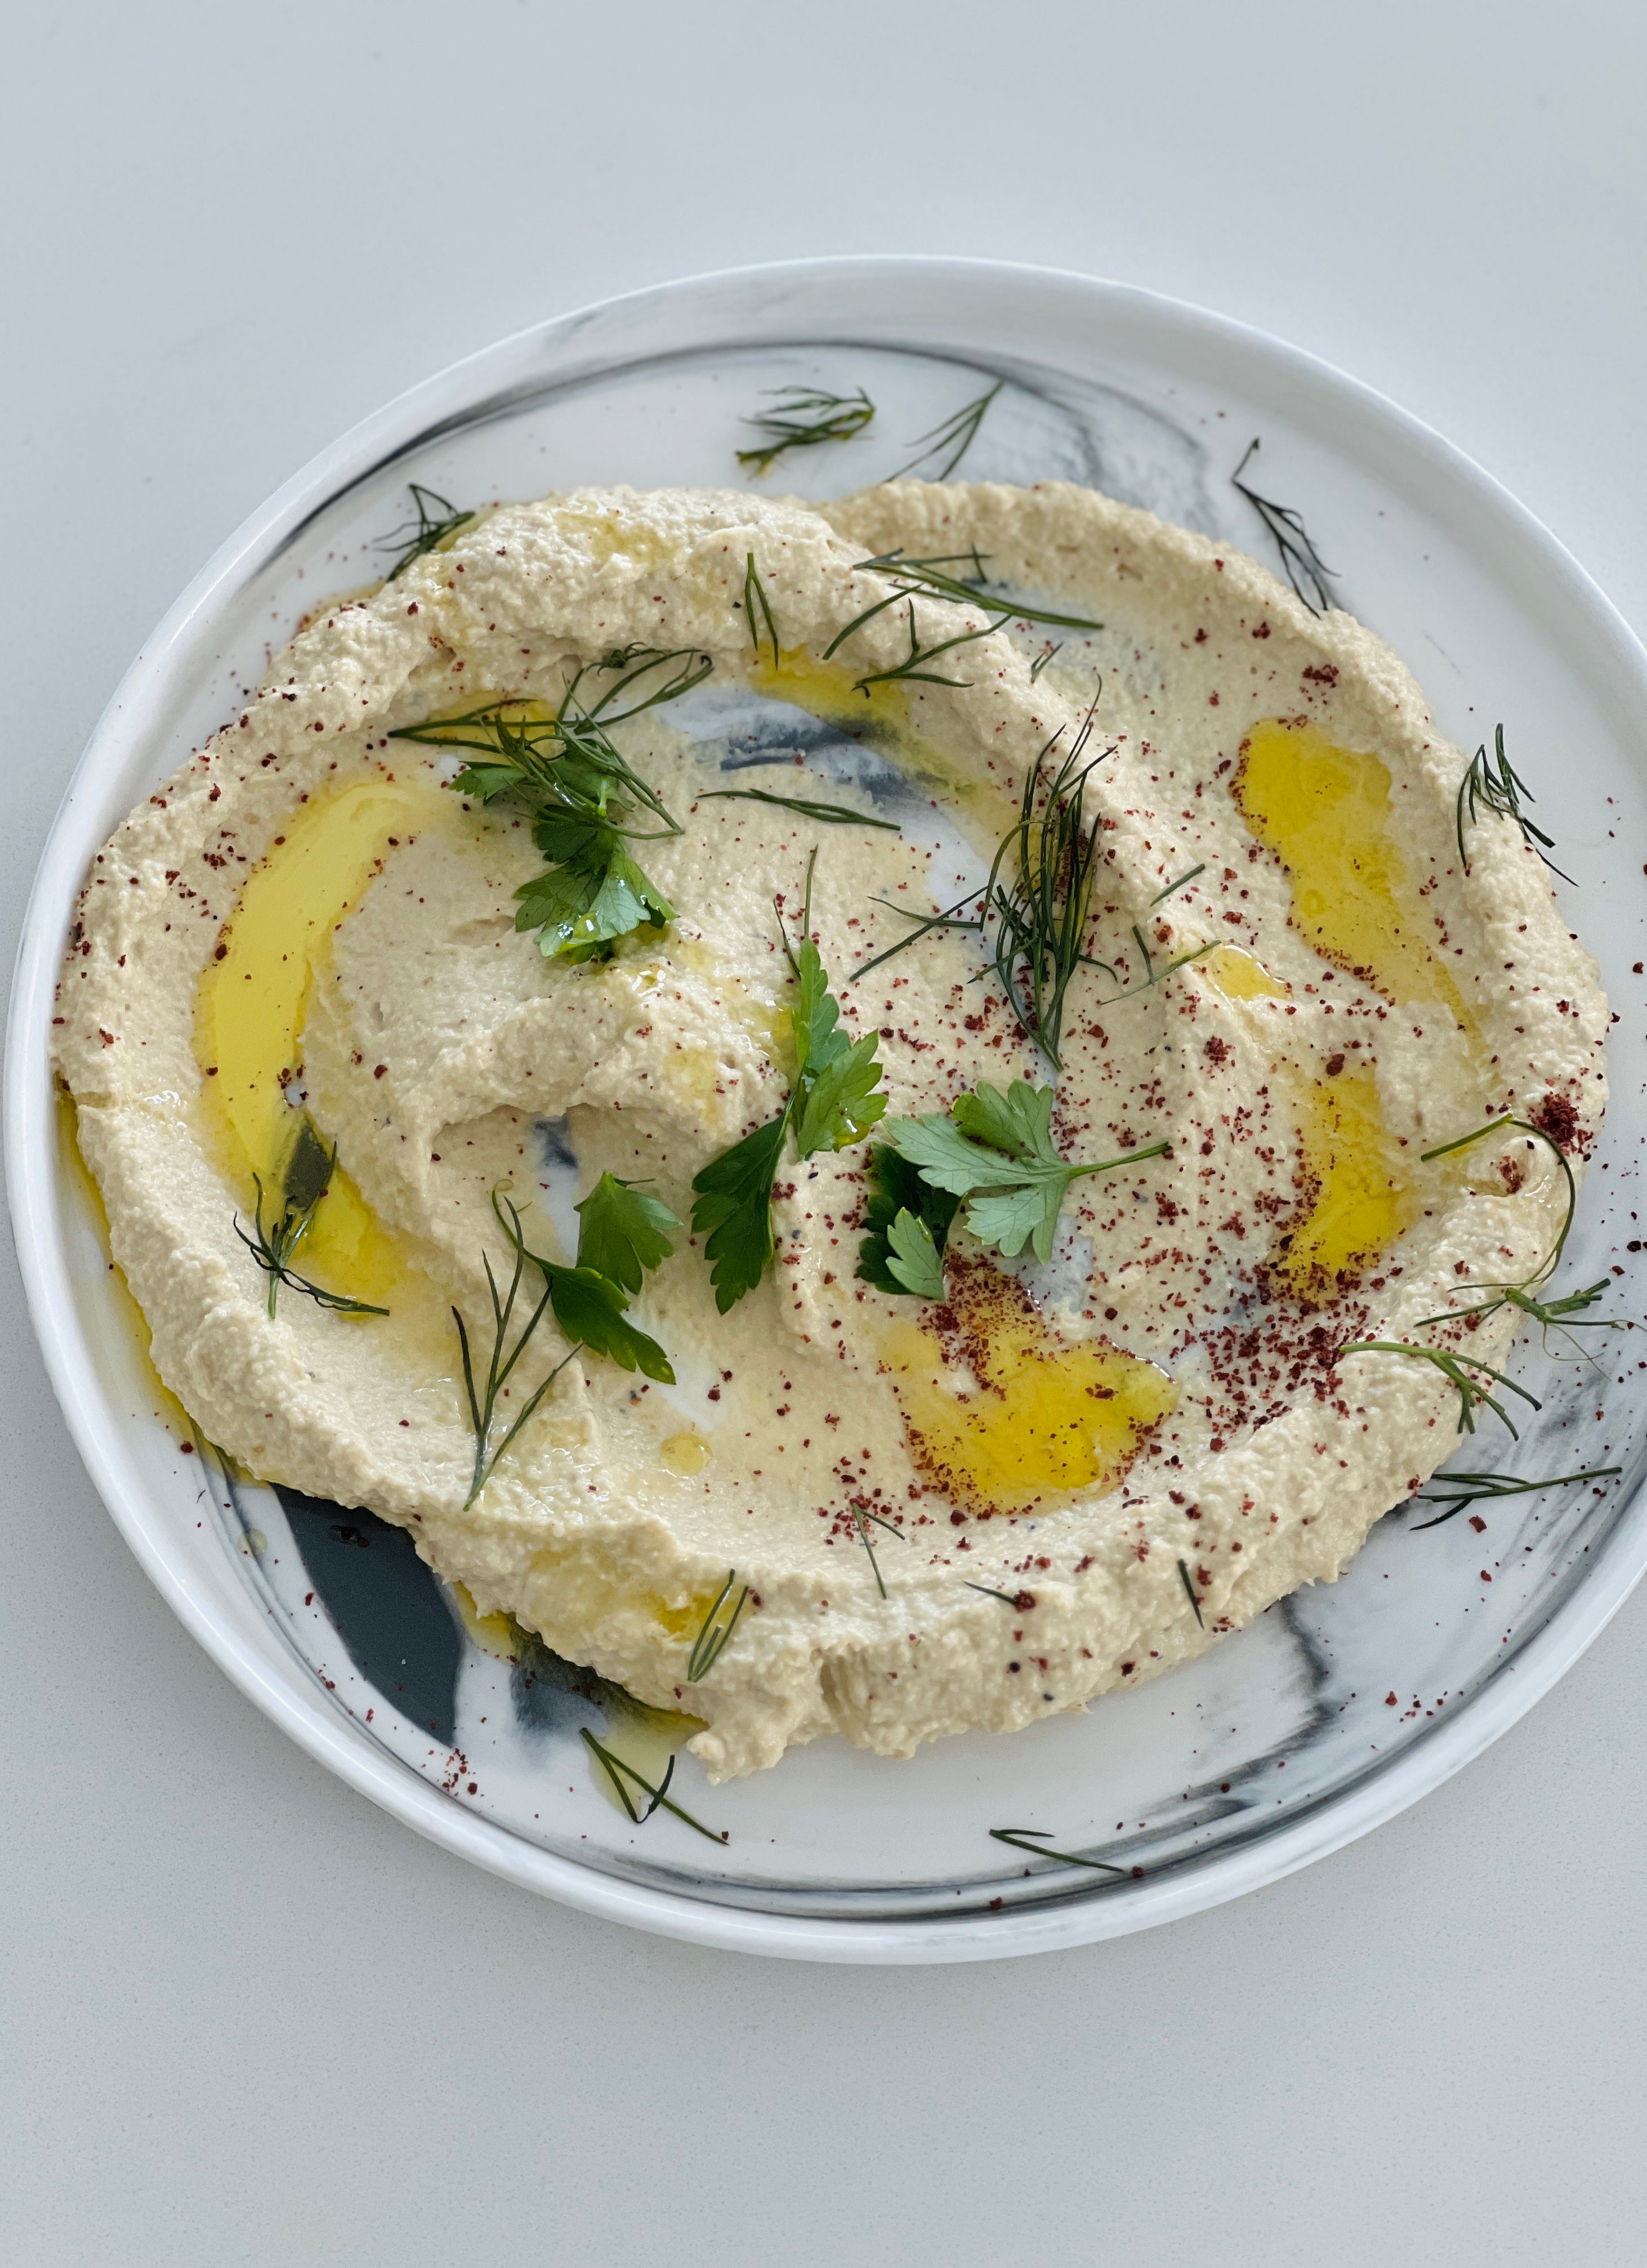 Plate of creamy artichoke hummus made with 'Everything Tahini', garnished with a drizzle of olive oil and fresh green herbs, ready to be paired with crunchy veggie crudités